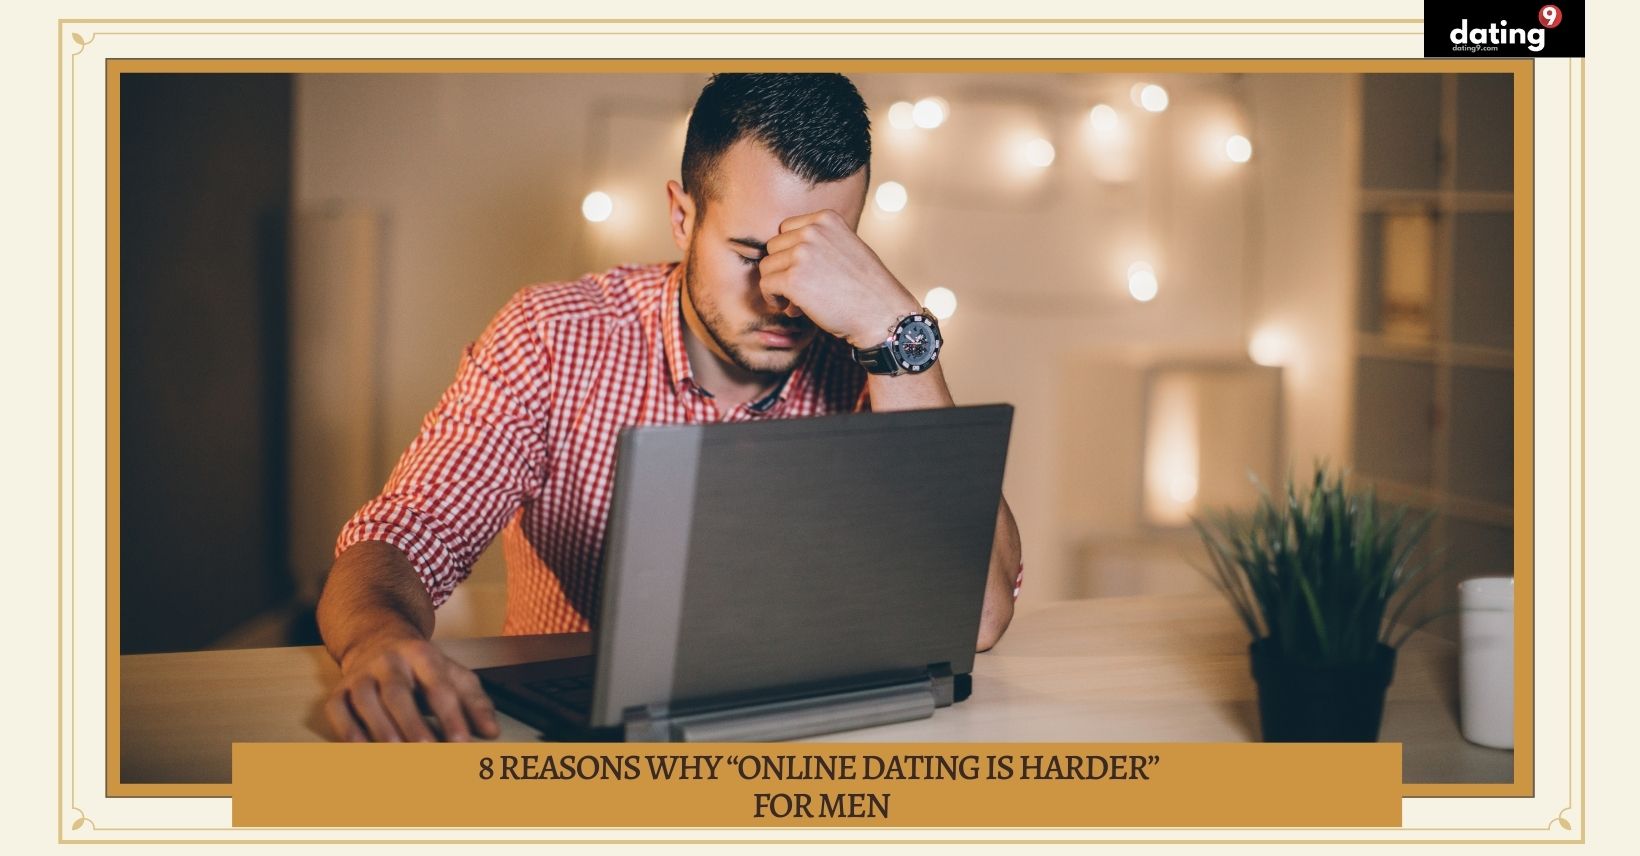 Reasons Why Online Dating is Harder for Men